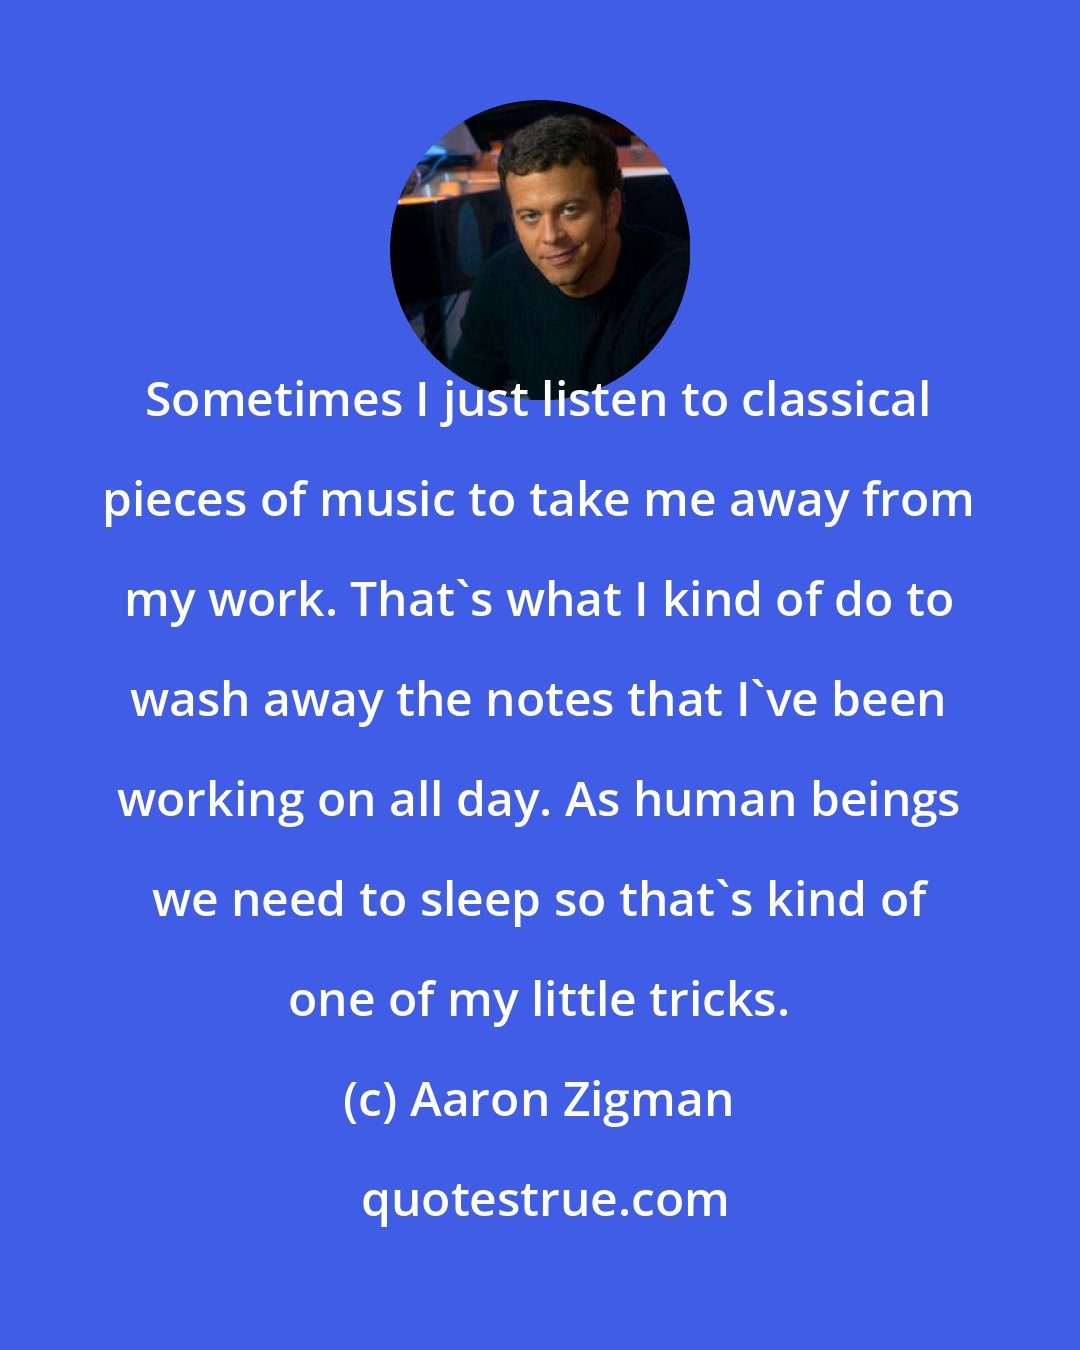 Aaron Zigman: Sometimes I just listen to classical pieces of music to take me away from my work. That's what I kind of do to wash away the notes that I've been working on all day. As human beings we need to sleep so that's kind of one of my little tricks.